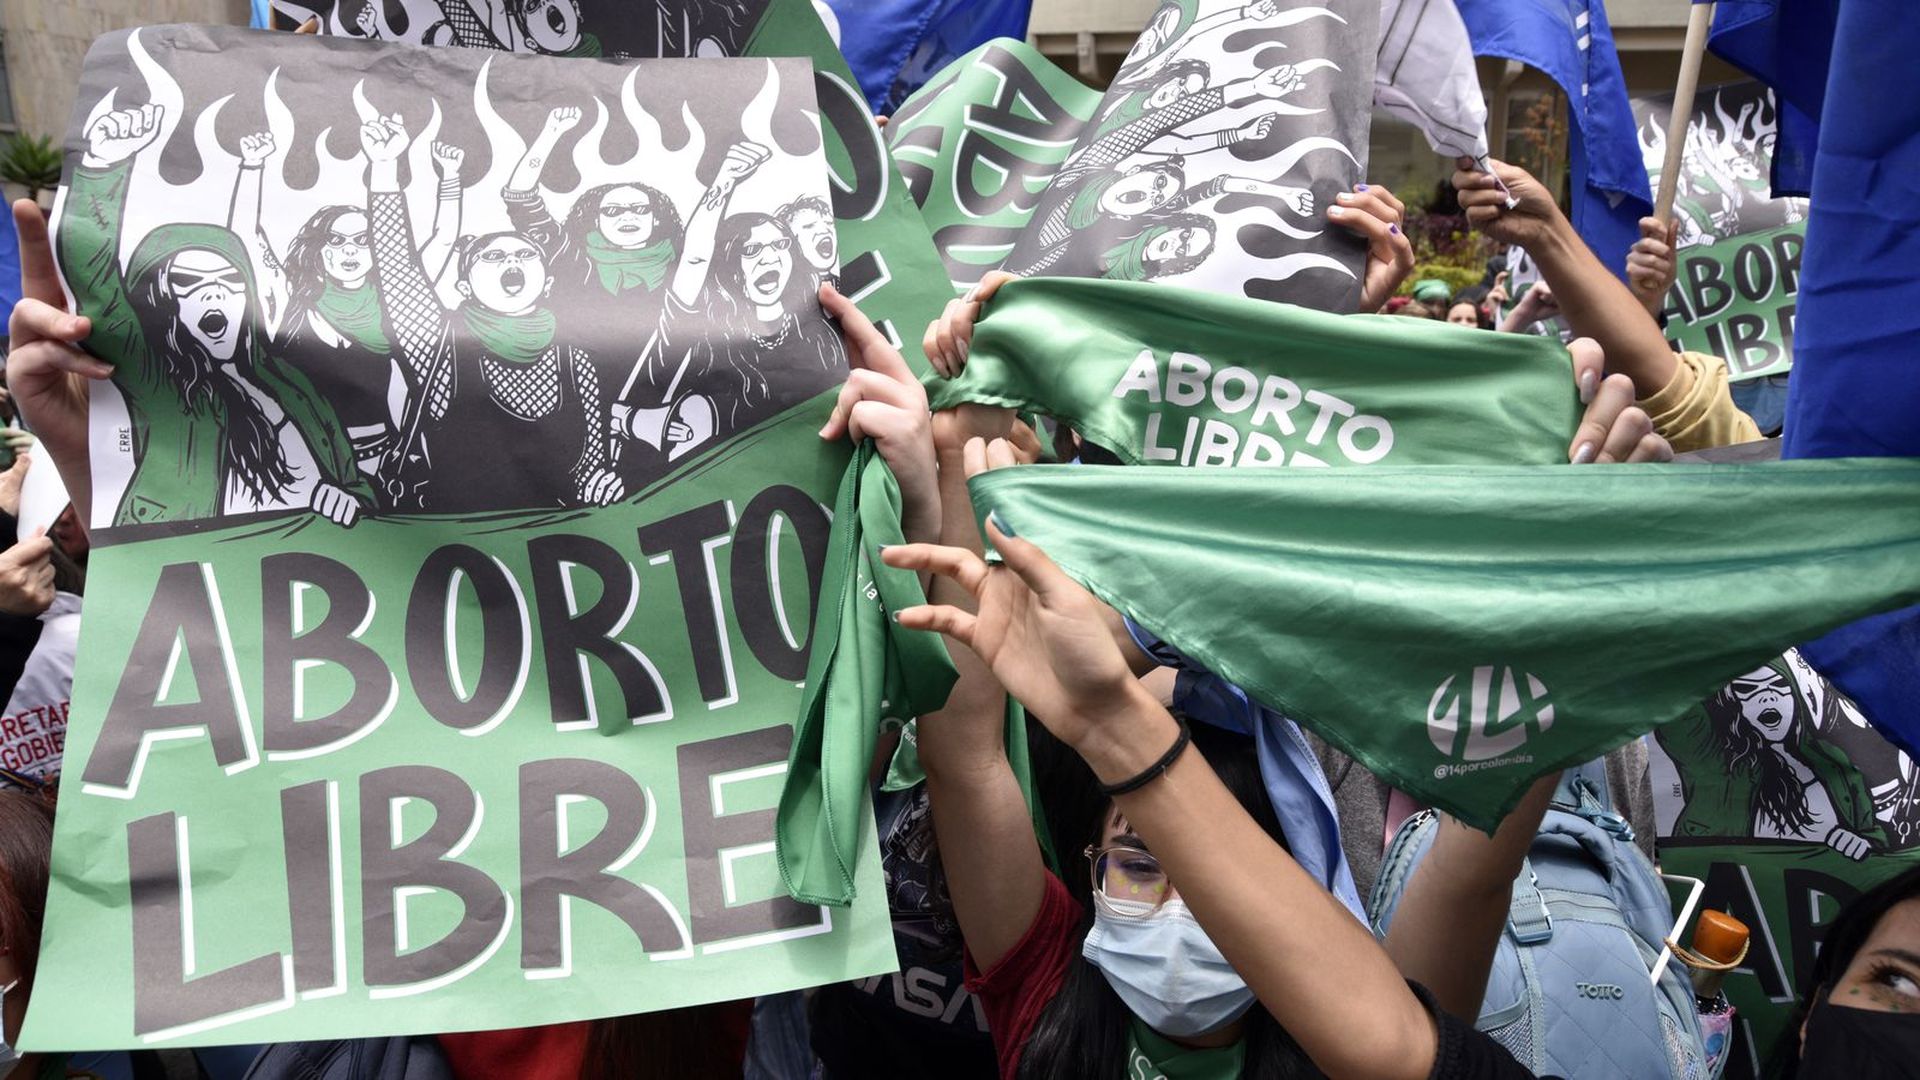 People hold up large green signs that say "free abortion" in Spanish